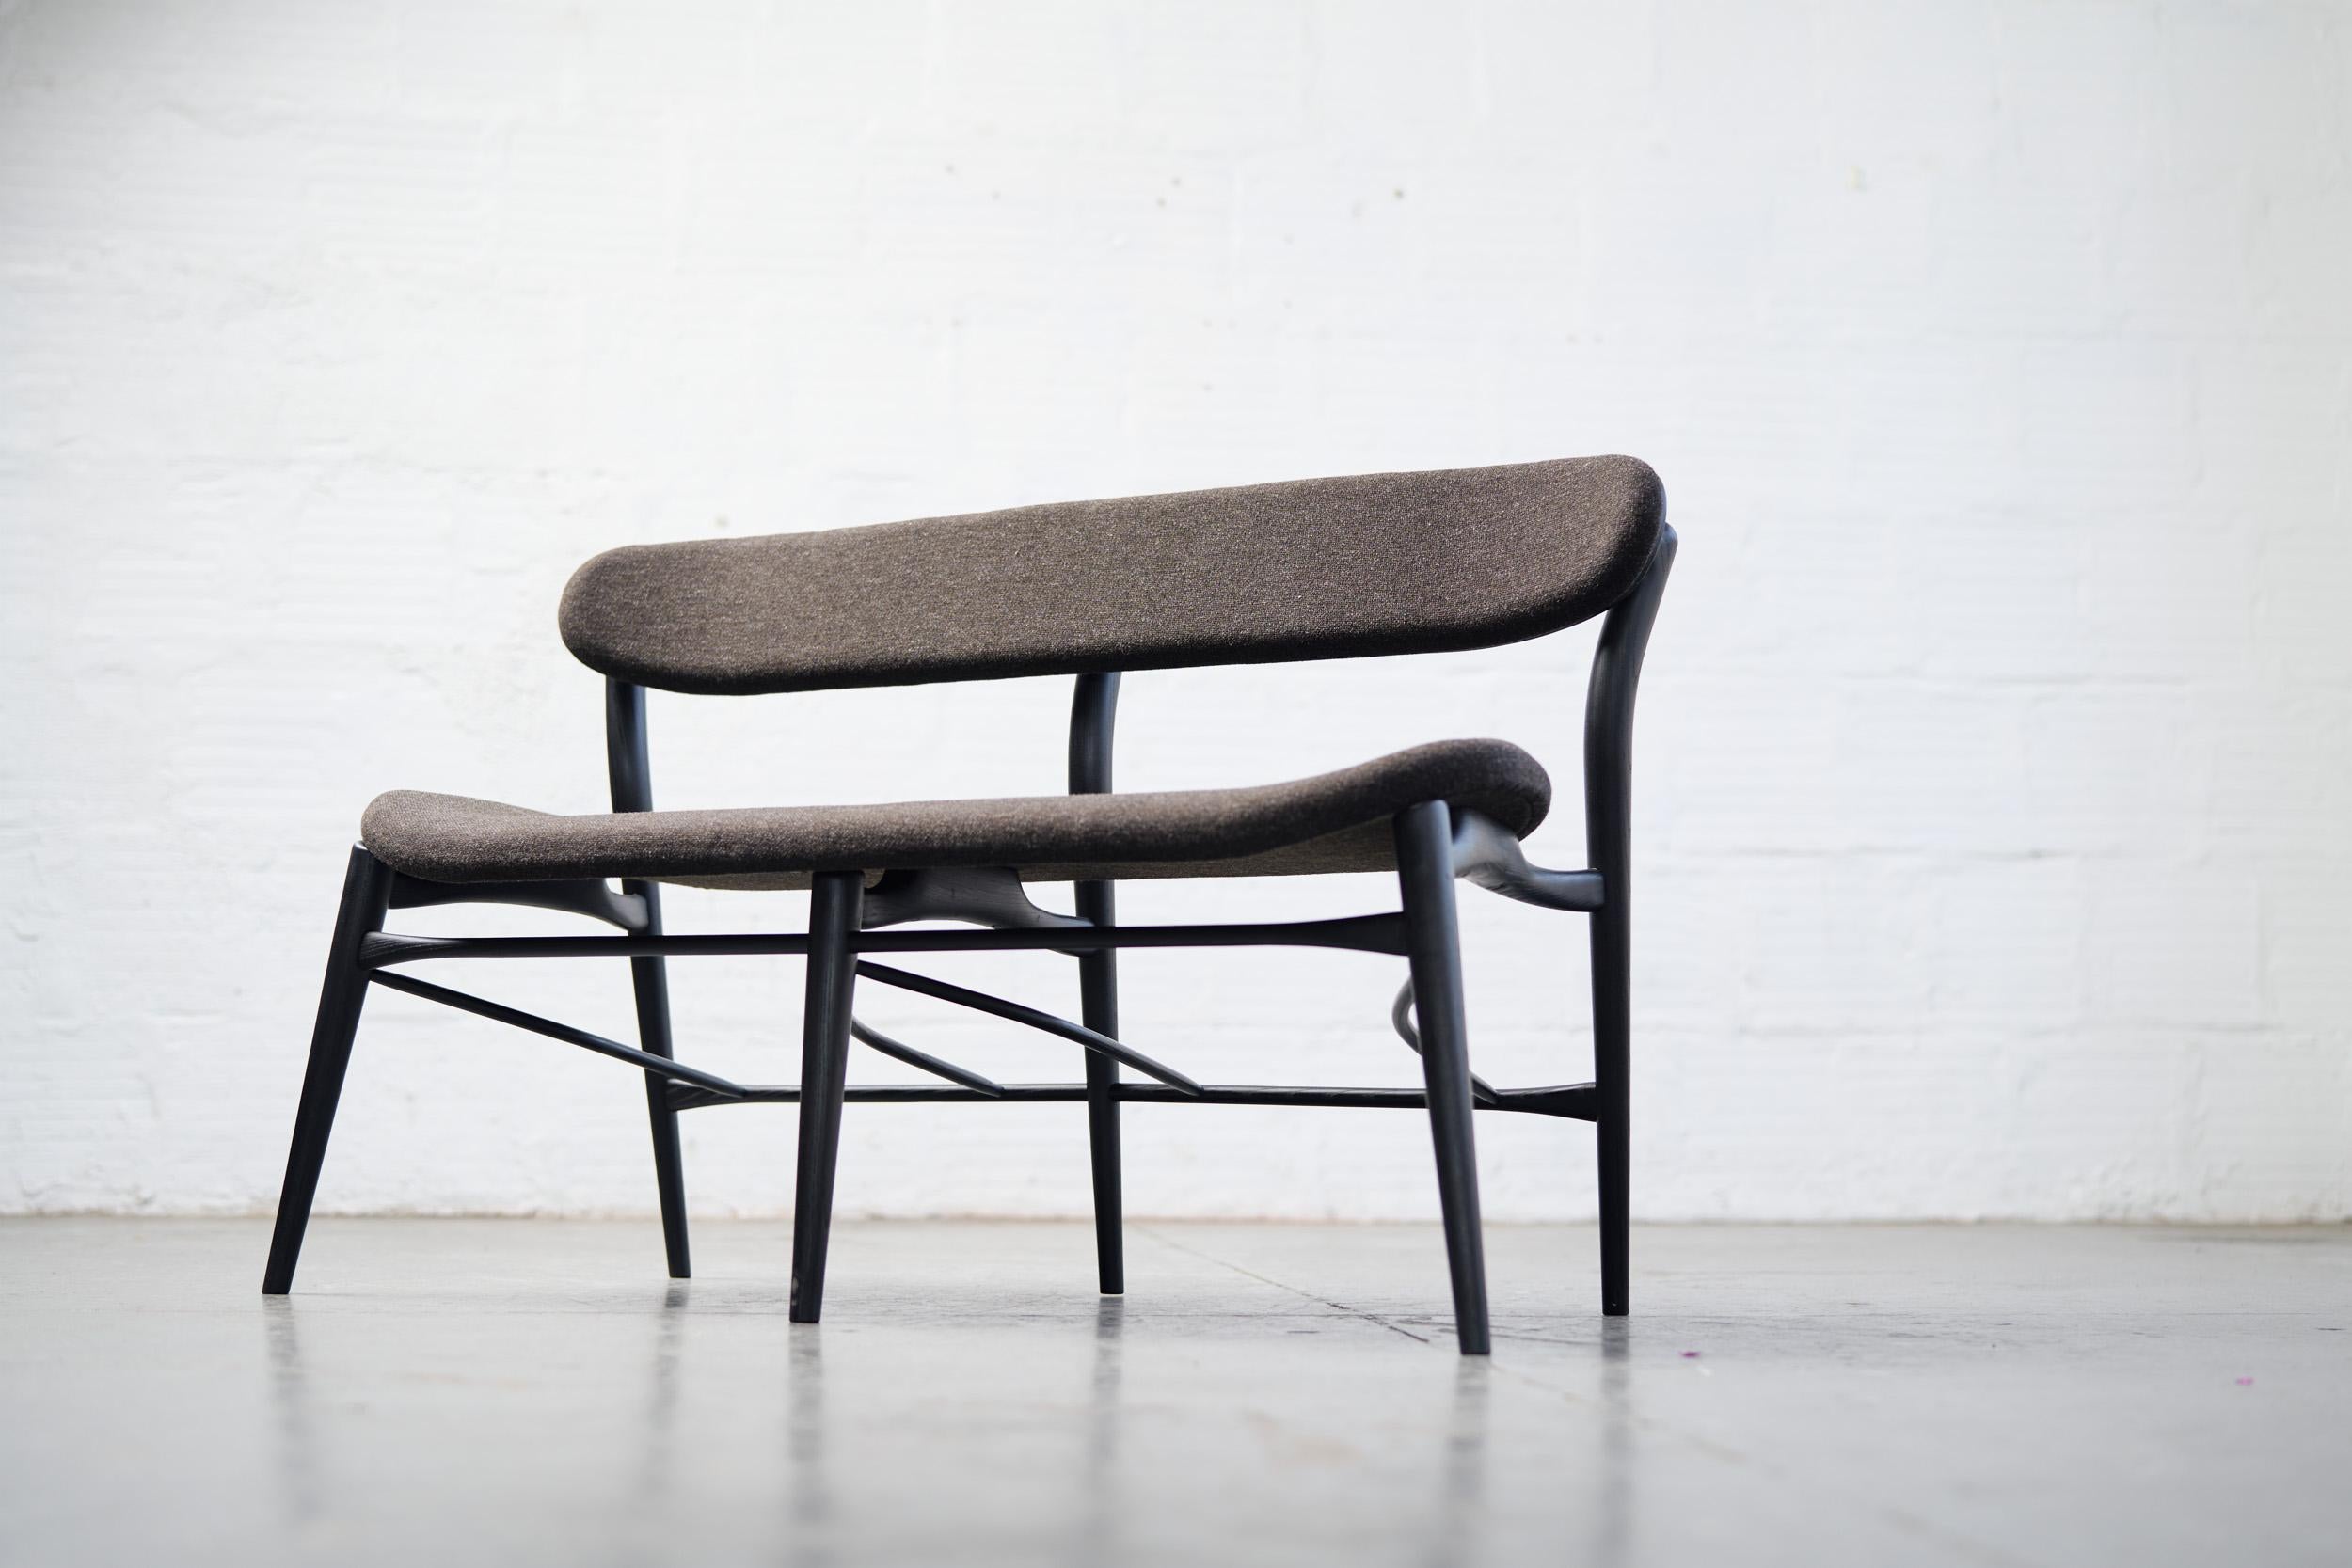 The Fjoon (Pair. fyoon) collection rose out of a multi-year obsession with high end upholstery as well as an infatuation with wood joinery and principles of chair strength from the broader chair making Community, especially windsor chair makers. My